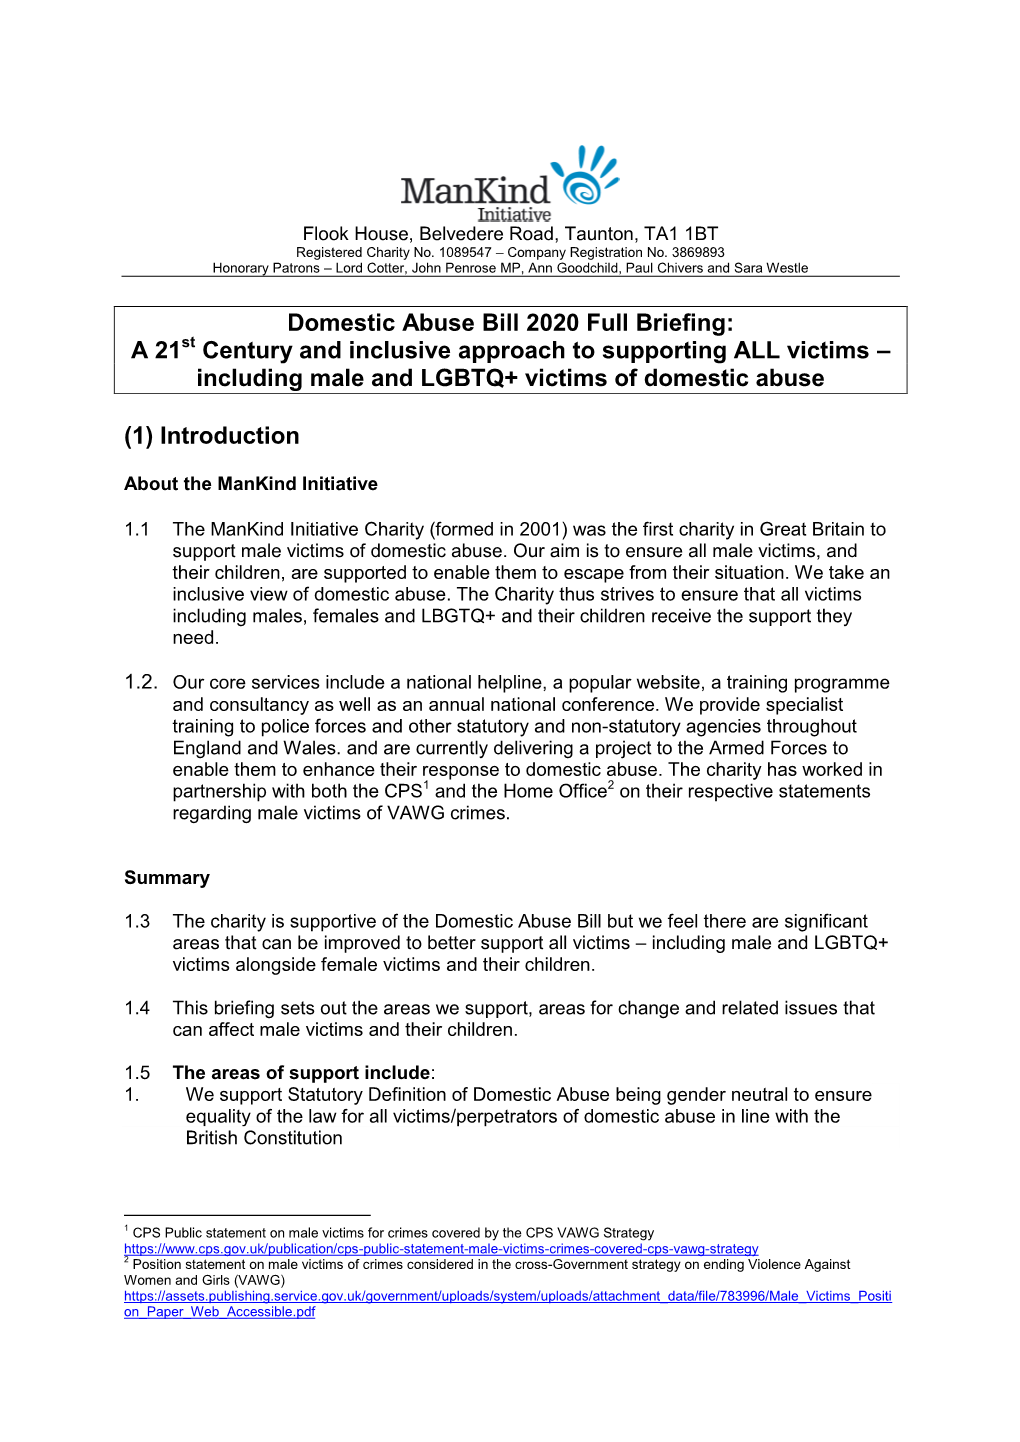 Domestic Abuse Bill 2020 Full Briefing: a 21St Century and Inclusive Approach to Supporting ALL Victims – Including Male and LGBTQ+ Victims of Domestic Abuse